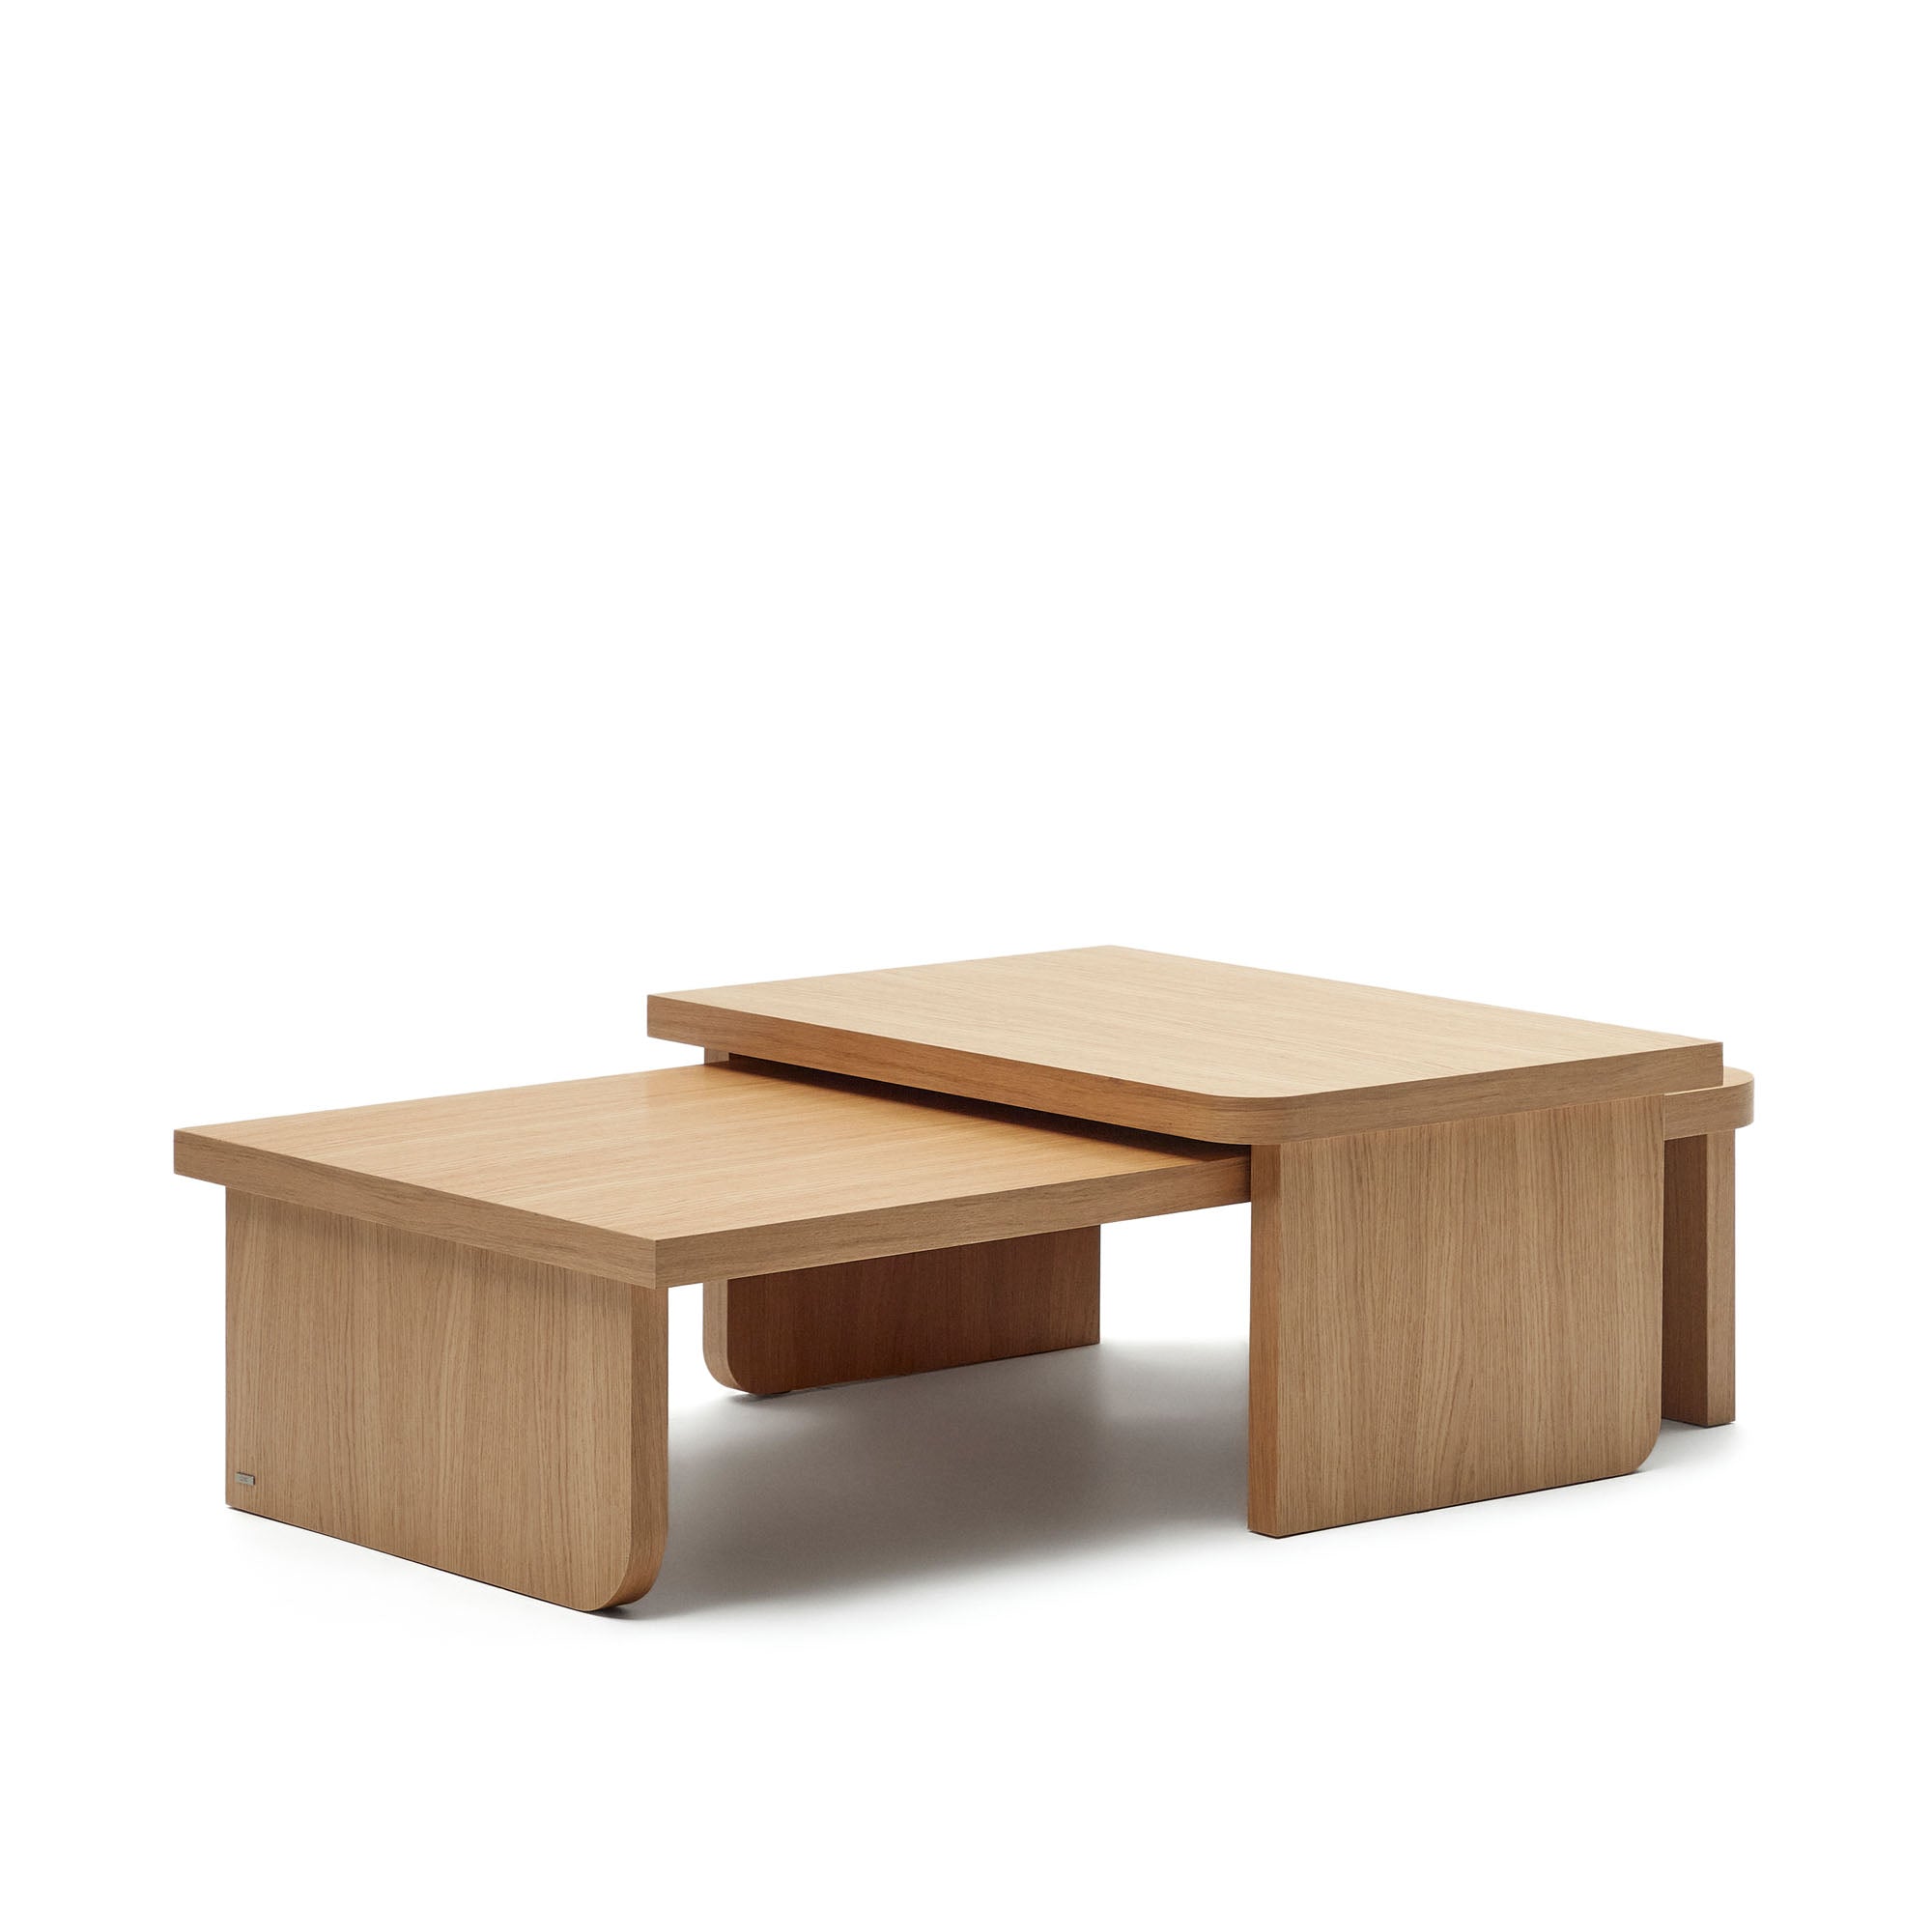 Oaq set of 2 coffee tables in oak wood veneer with natural finish